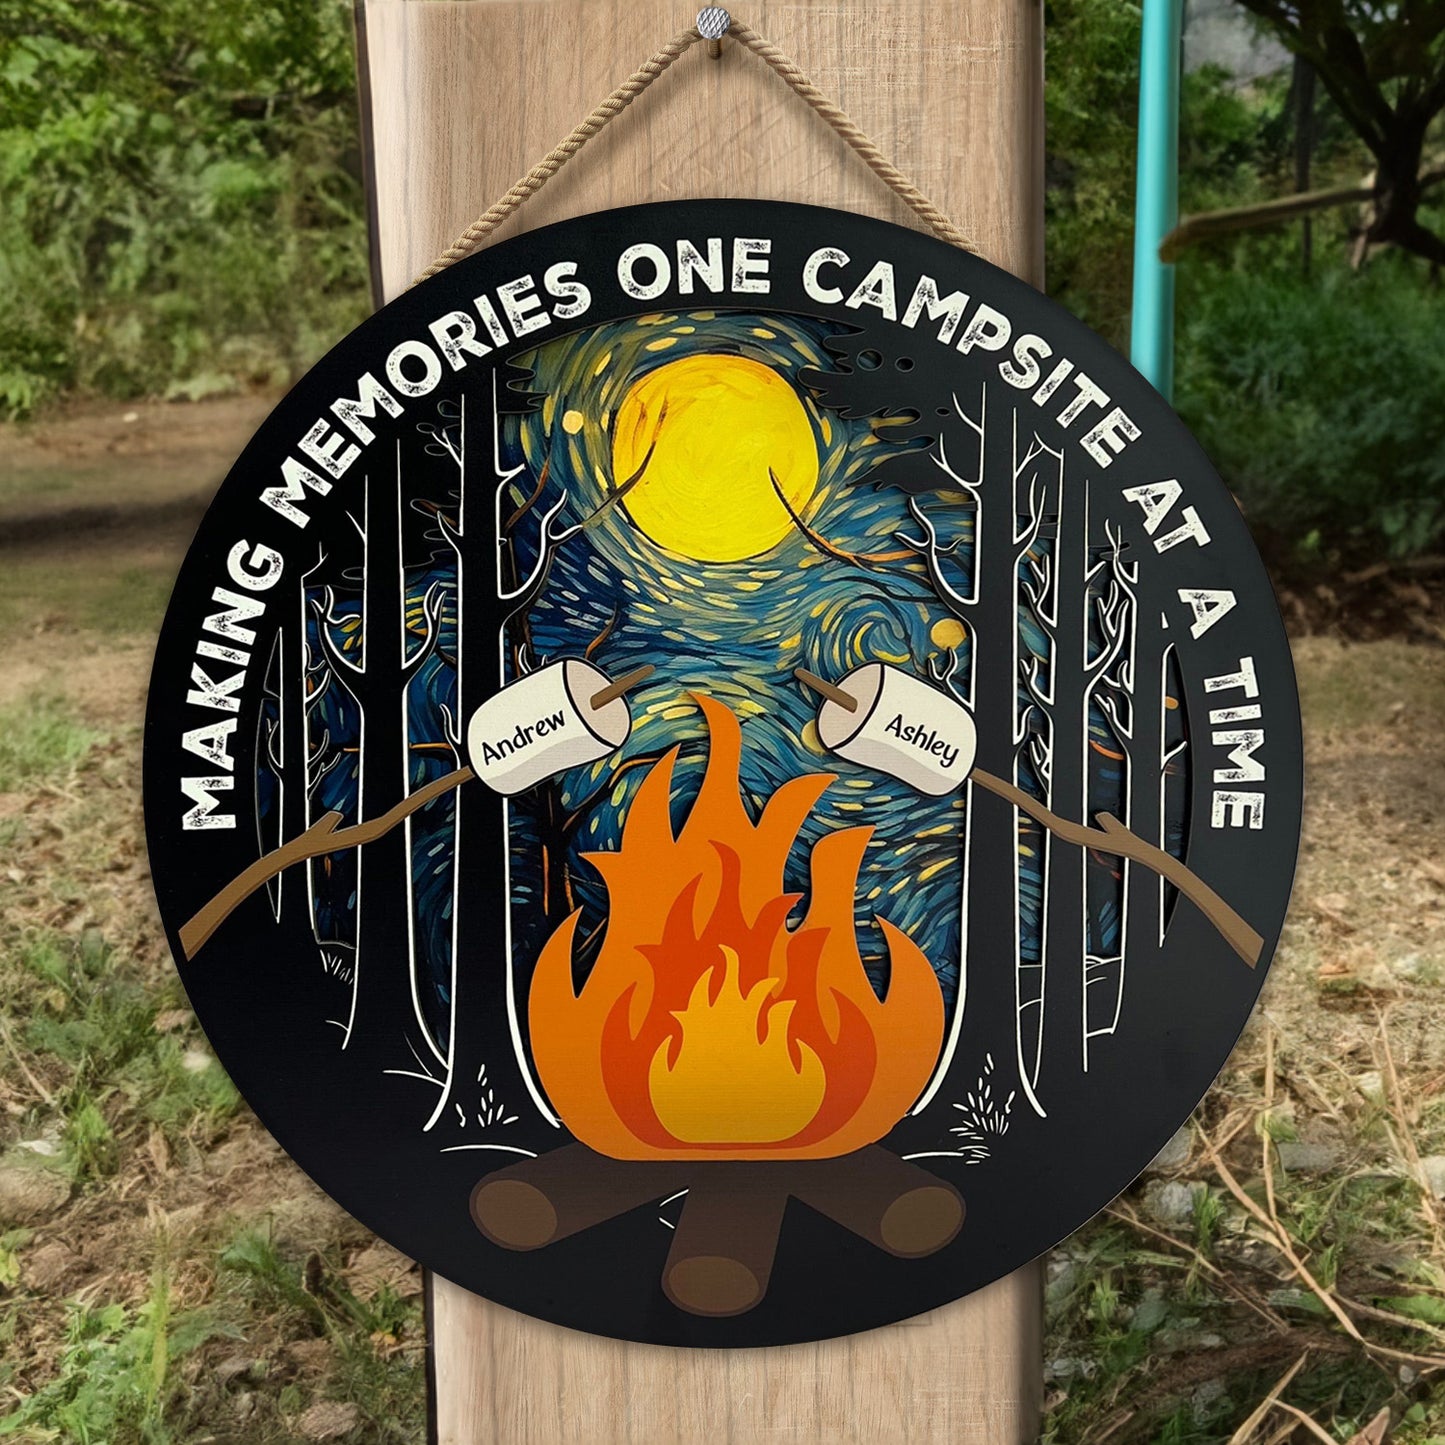 Making Memories One Campsite At A Time - Personalized 2 Layers Wood Sign